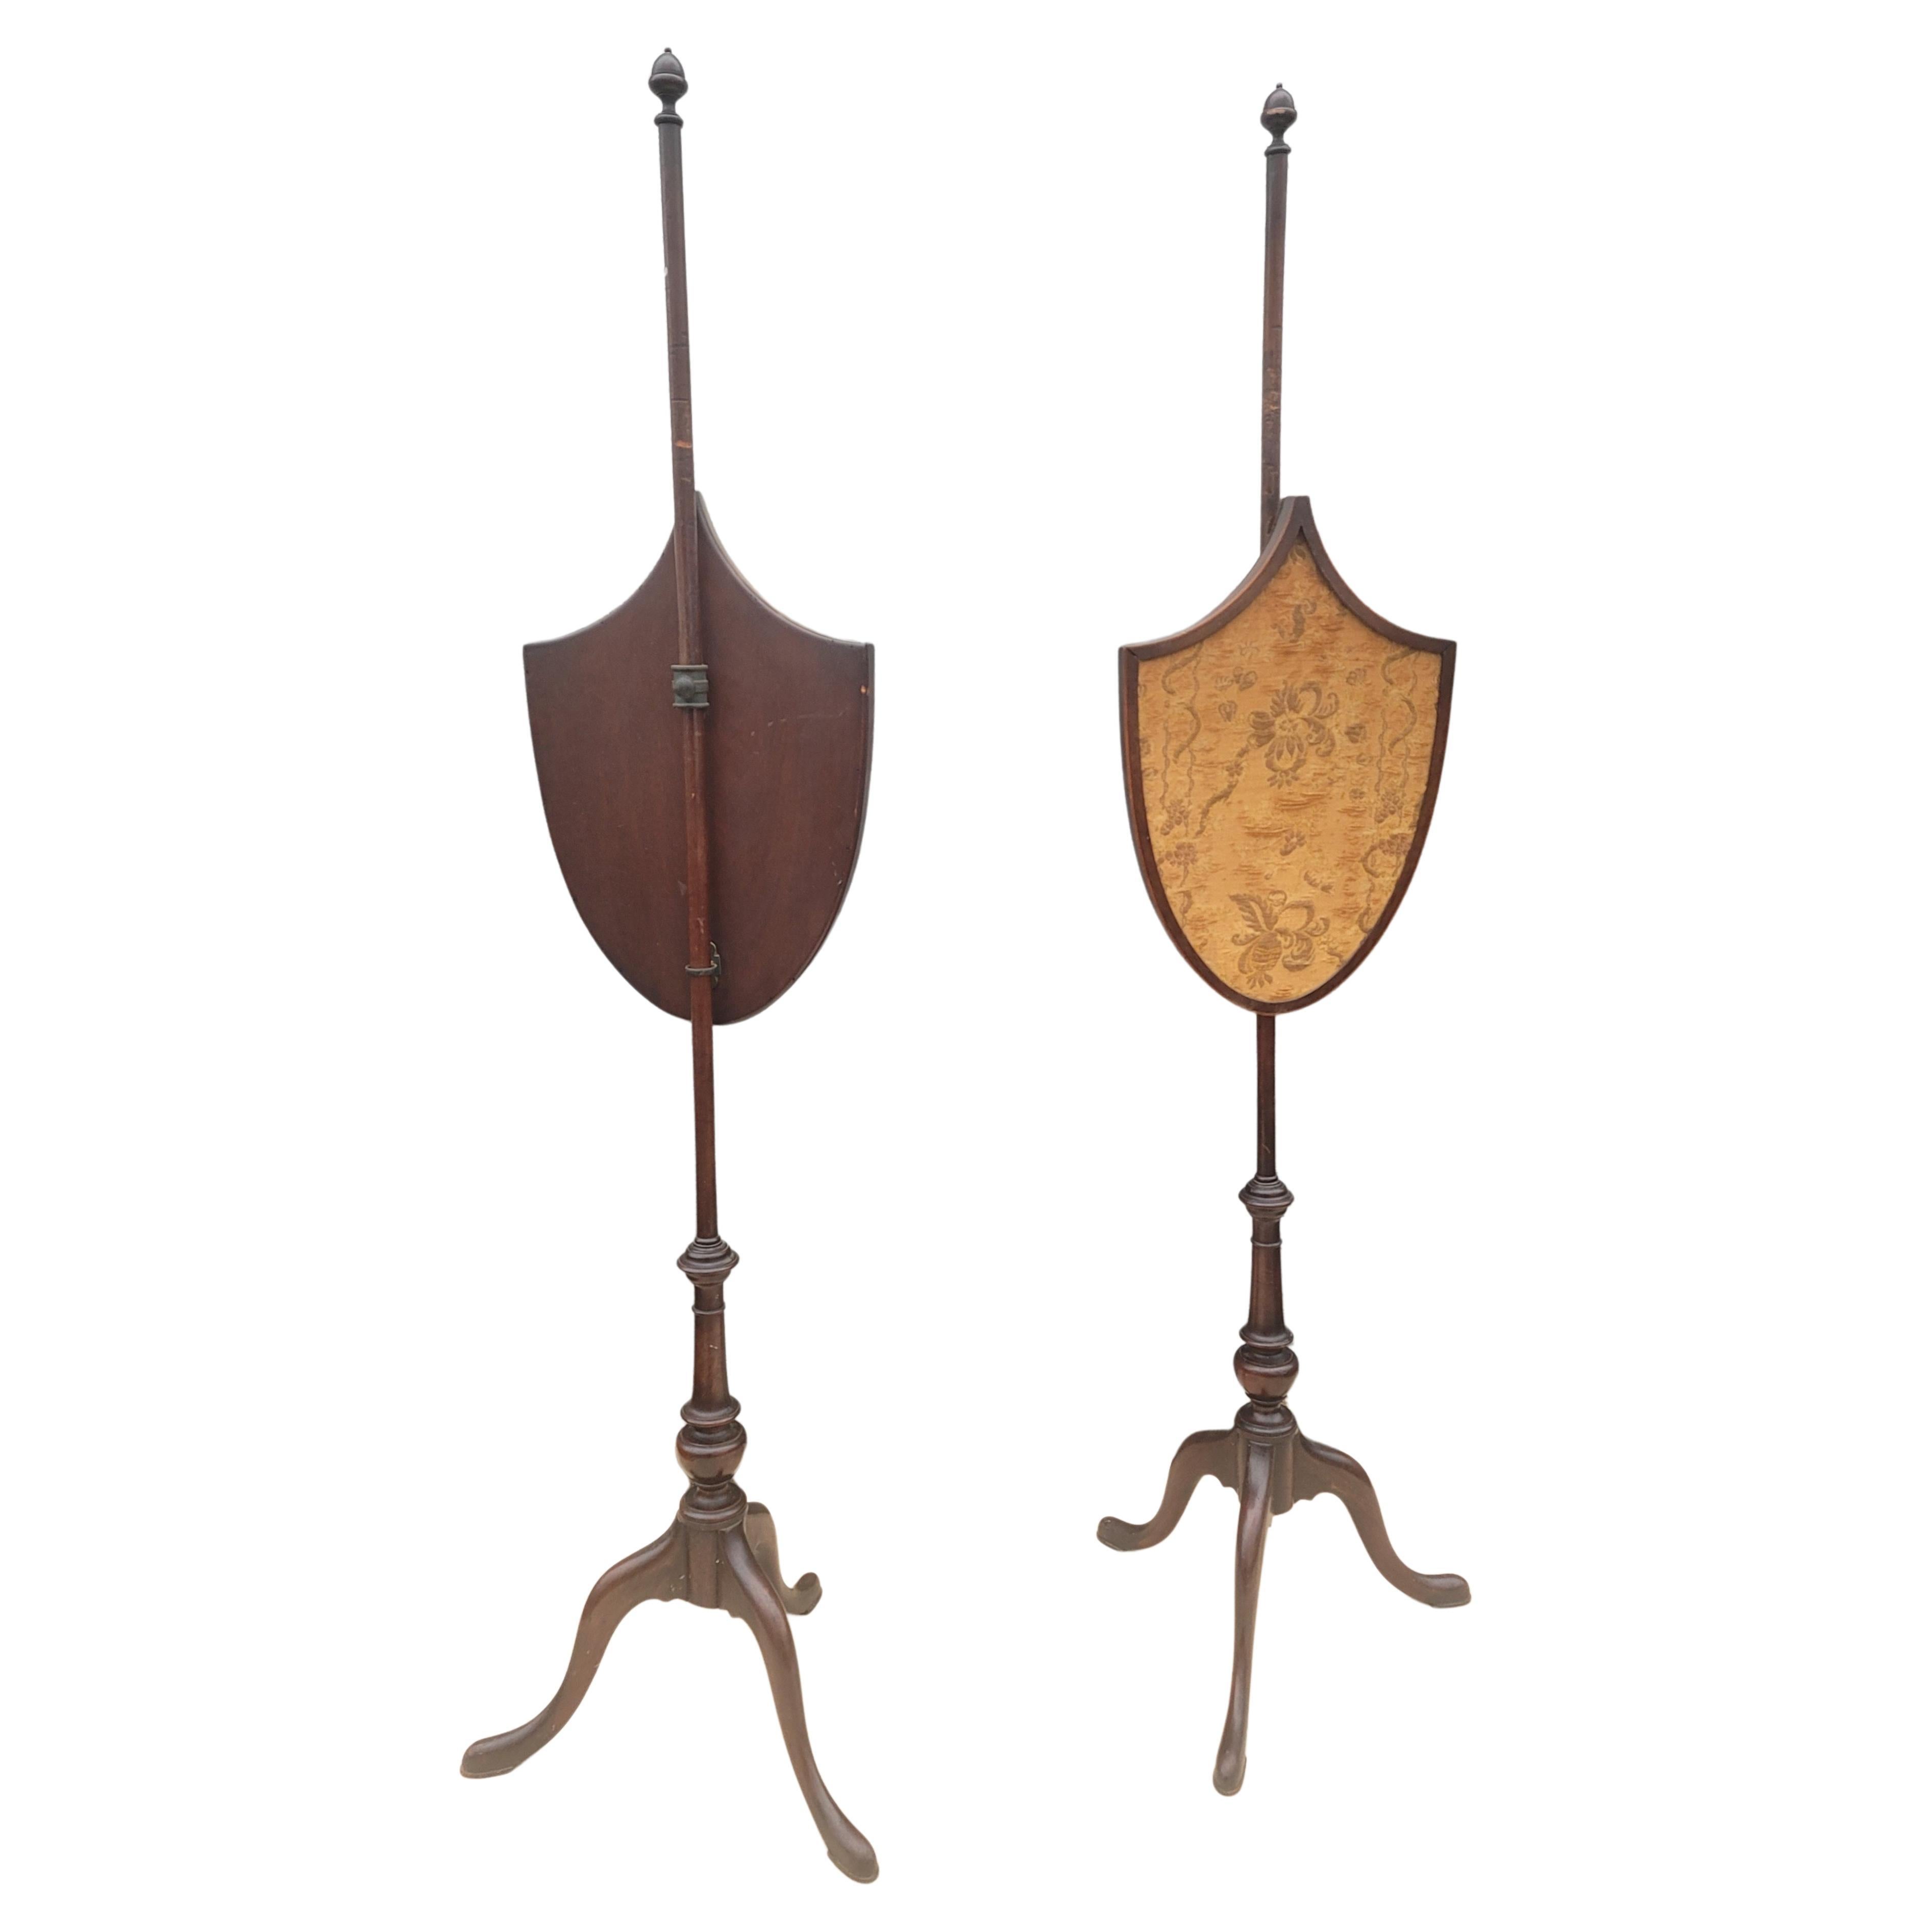 A pair of English Chippendale mahogany shield back with original needlepoint work pole screens with a urn finial , telescopic turned bulbous shaft, and terminating on tripod snake feet. Adjustable height screen panels mid-18th century.